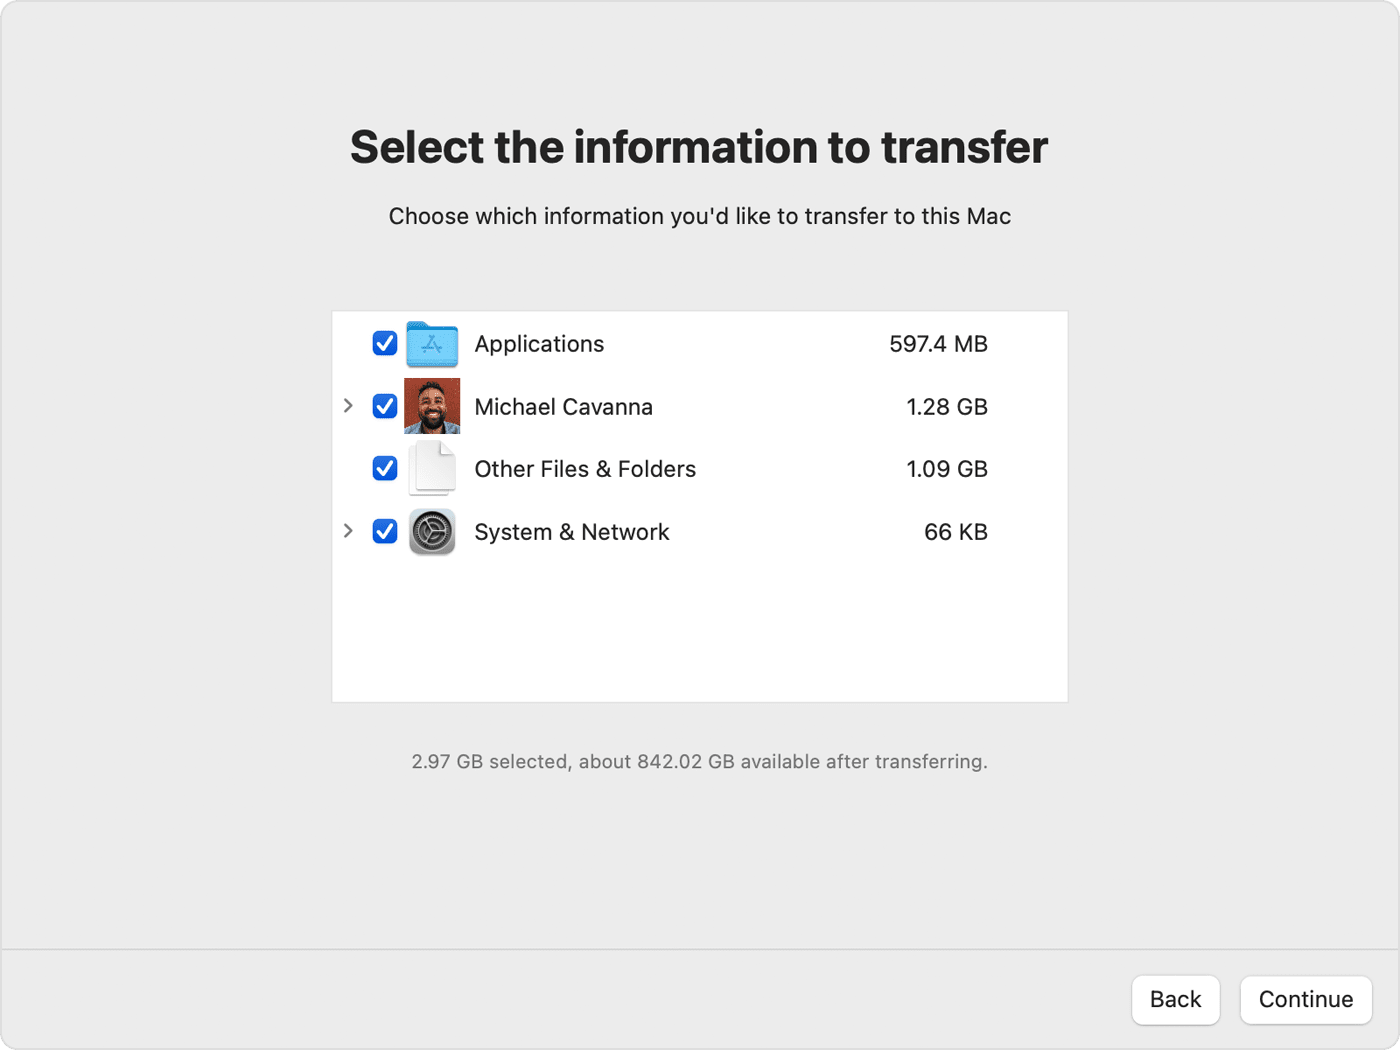 macos-monterey-migration-assistant-info-to-transfer-2656379